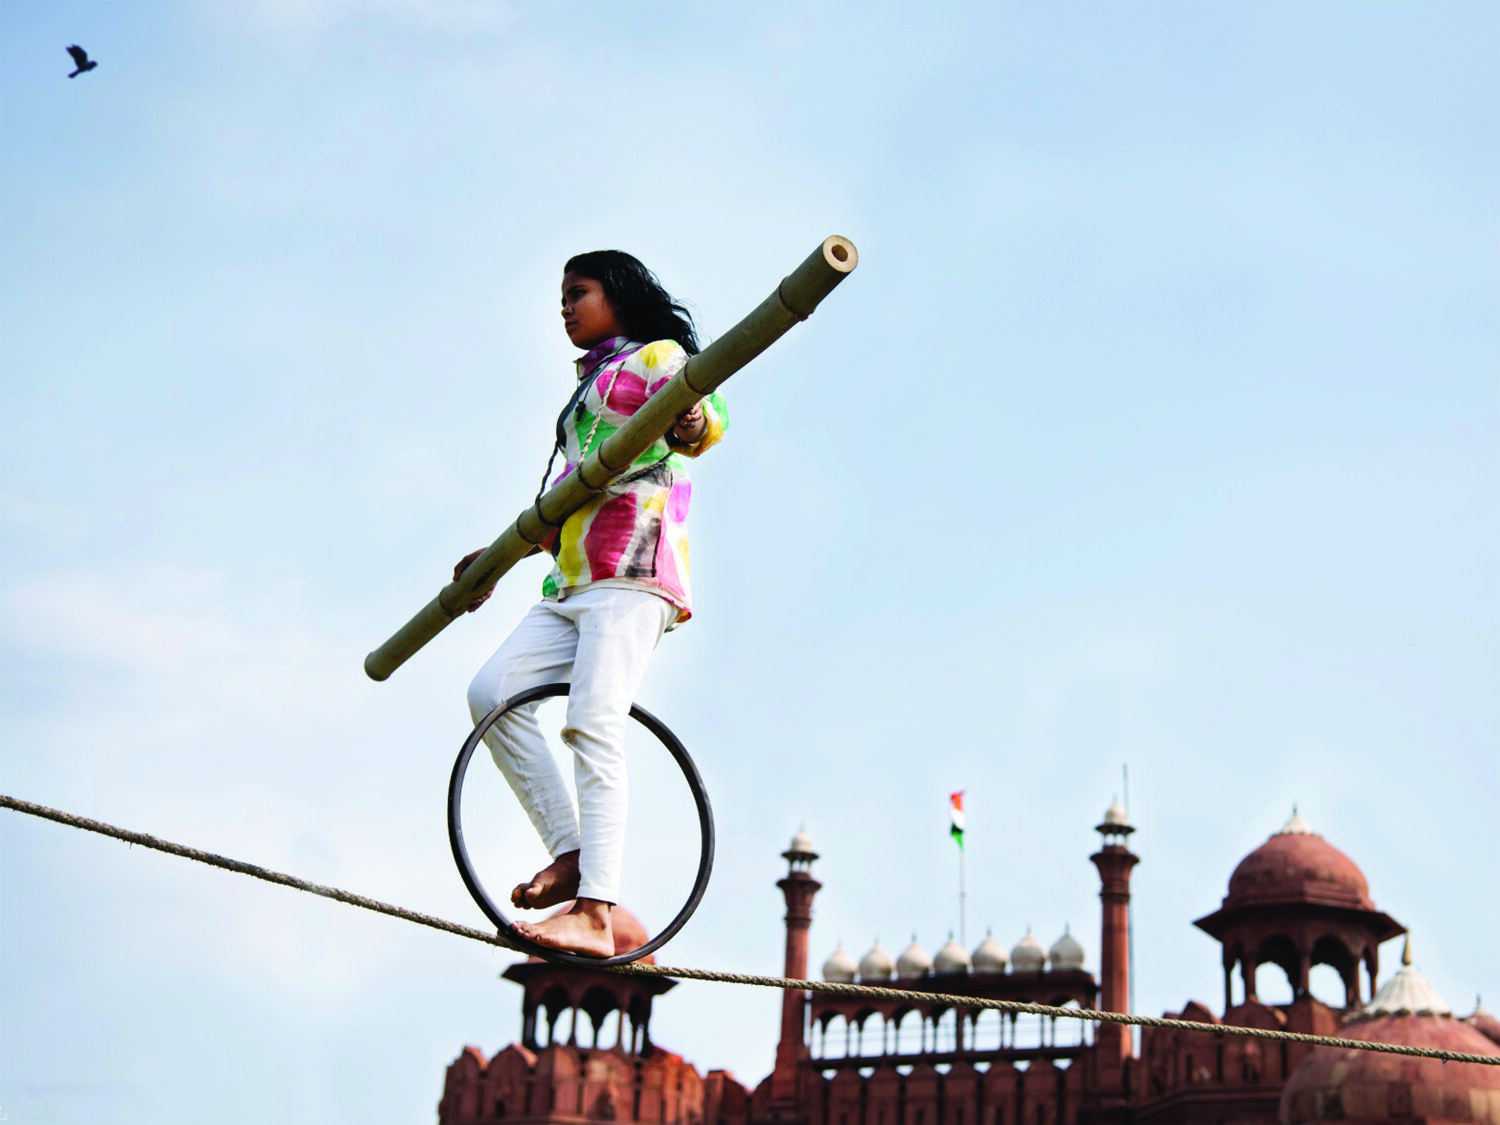 Ganga, the14 year old trapeze artist from Mumbai who is the central figure of the short 'Walk of Courage'